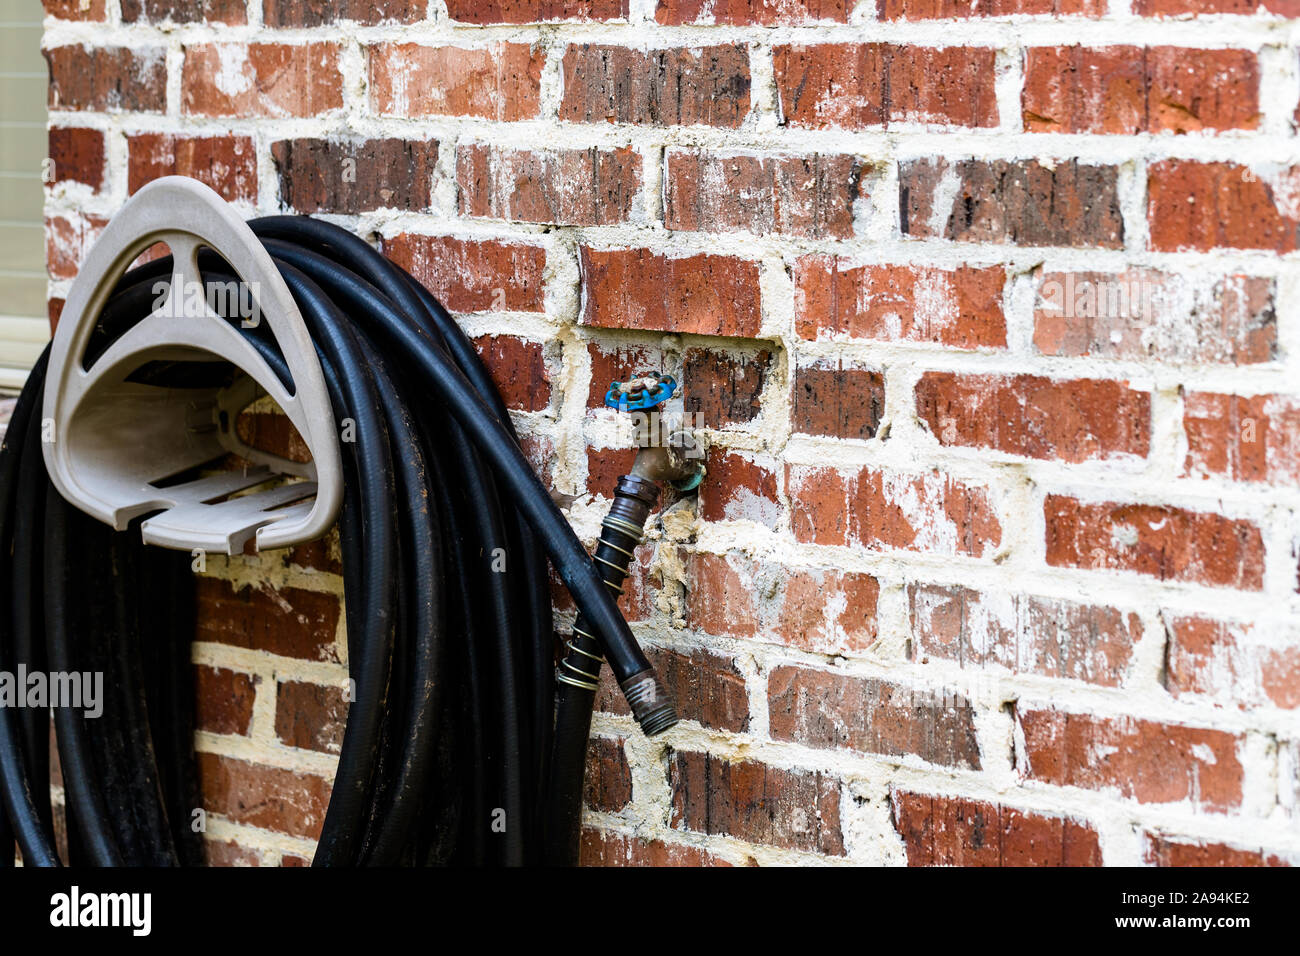 Rubber garden hose hanging on brick wall of house. Stock Photo